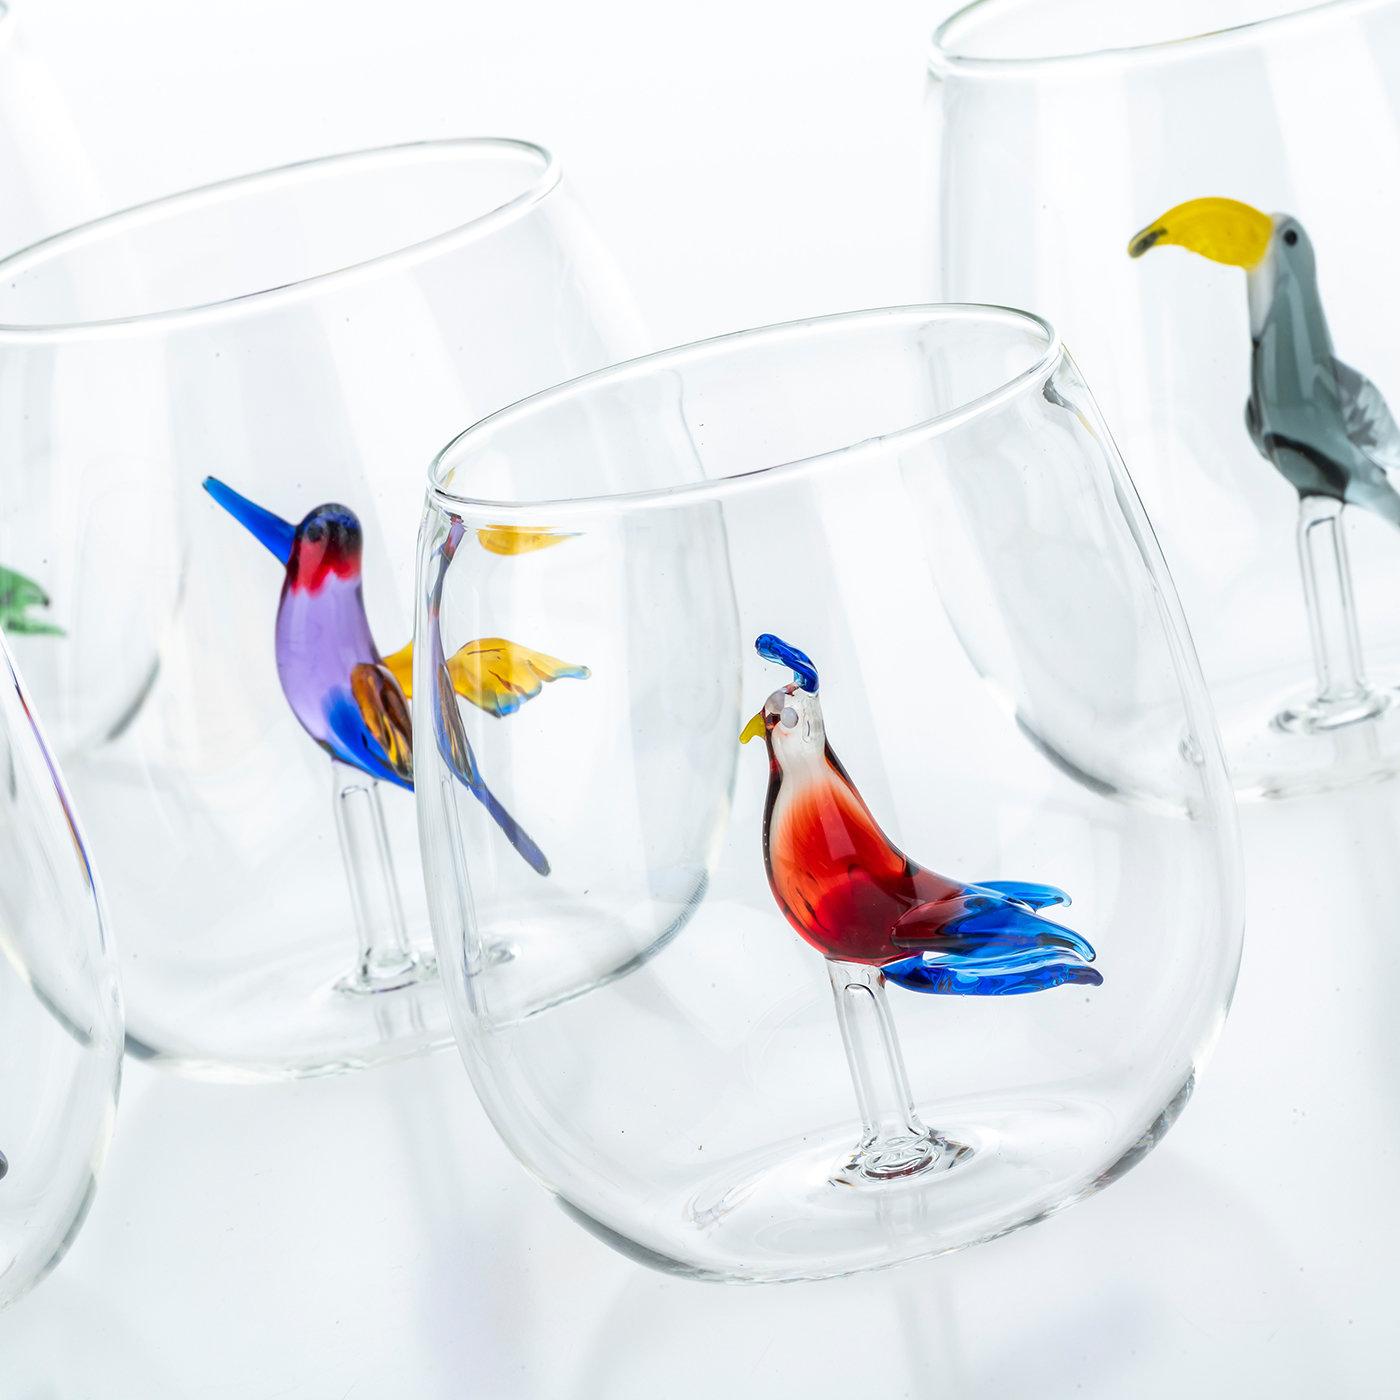 Refined and charming, this set is part of a new Casarialto collection inspired by the bright colors of tropical islands. Handmade of blown glass by skilled Venetian artisans, the set features a colorful tropical bird, dainty details, and a colorful